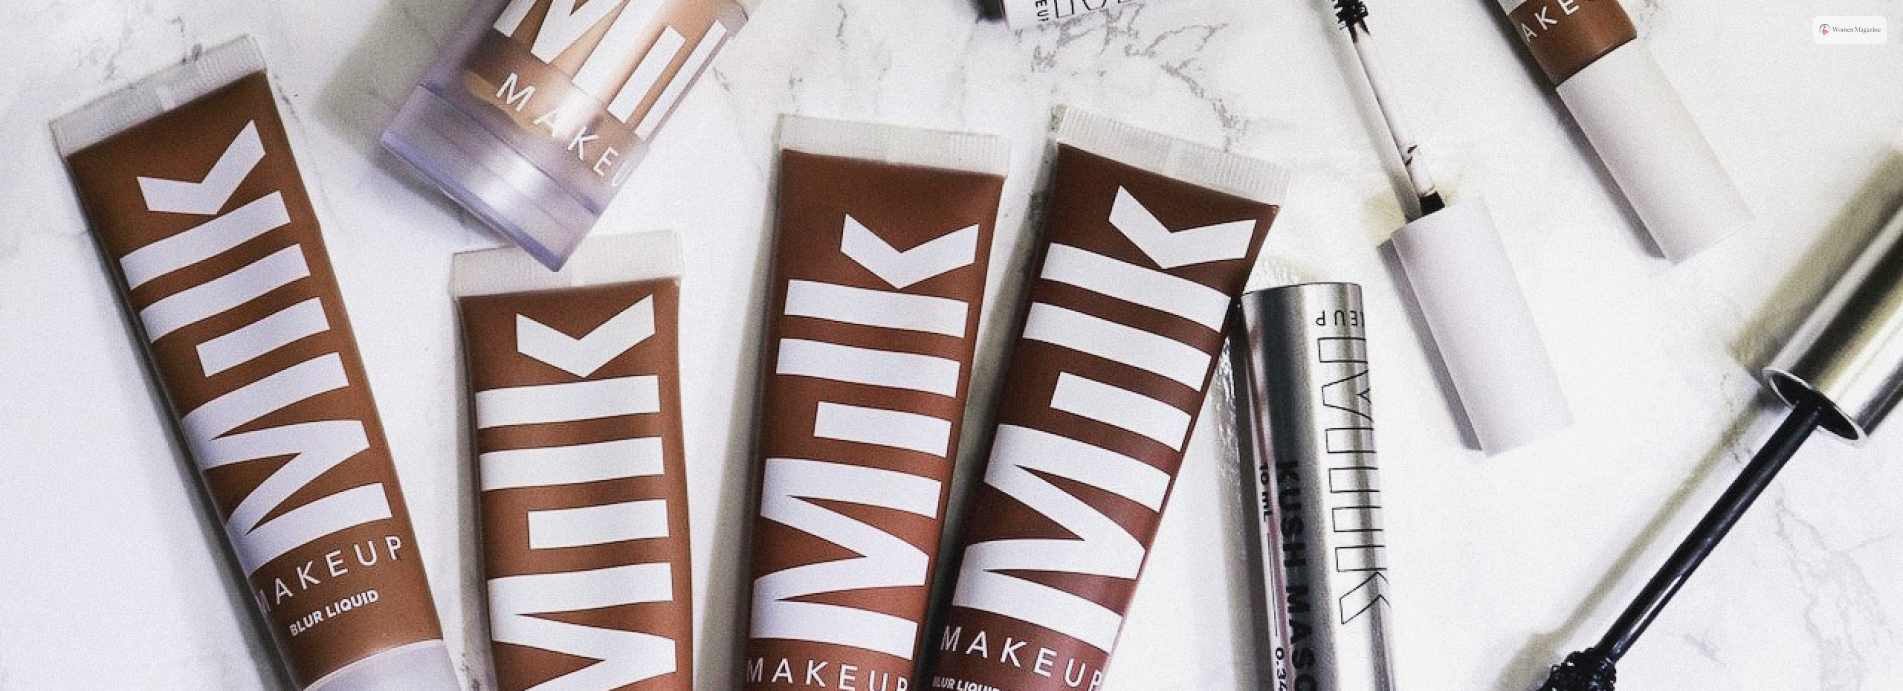 Milk Makeup: Promoting Sustainable, Clean, And Inclusive Beauty Products